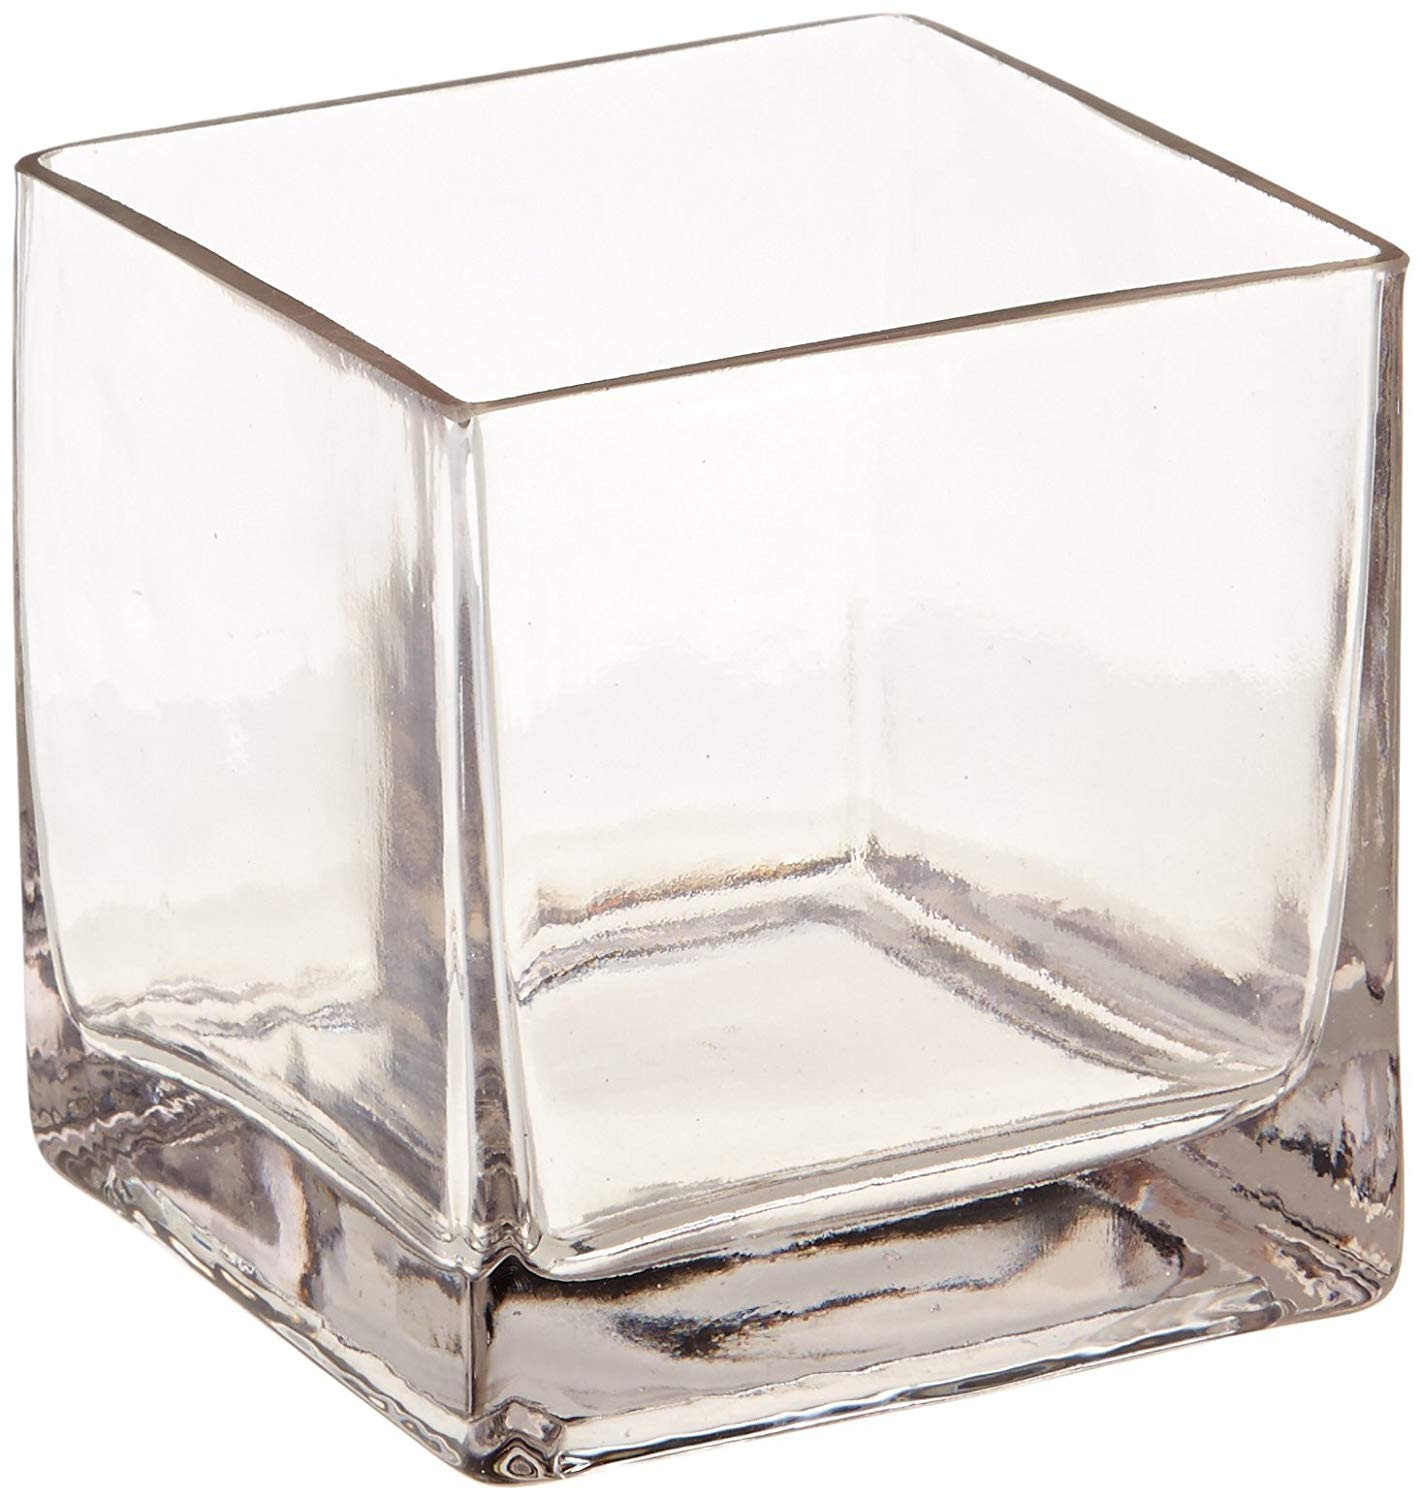 18 Unique Clear Plastic Square Vase 2024 free download clear plastic square vase of amazon com 12piece 4 square crystal clear glass vase home kitchen throughout 71 jezfmvnl sl1500